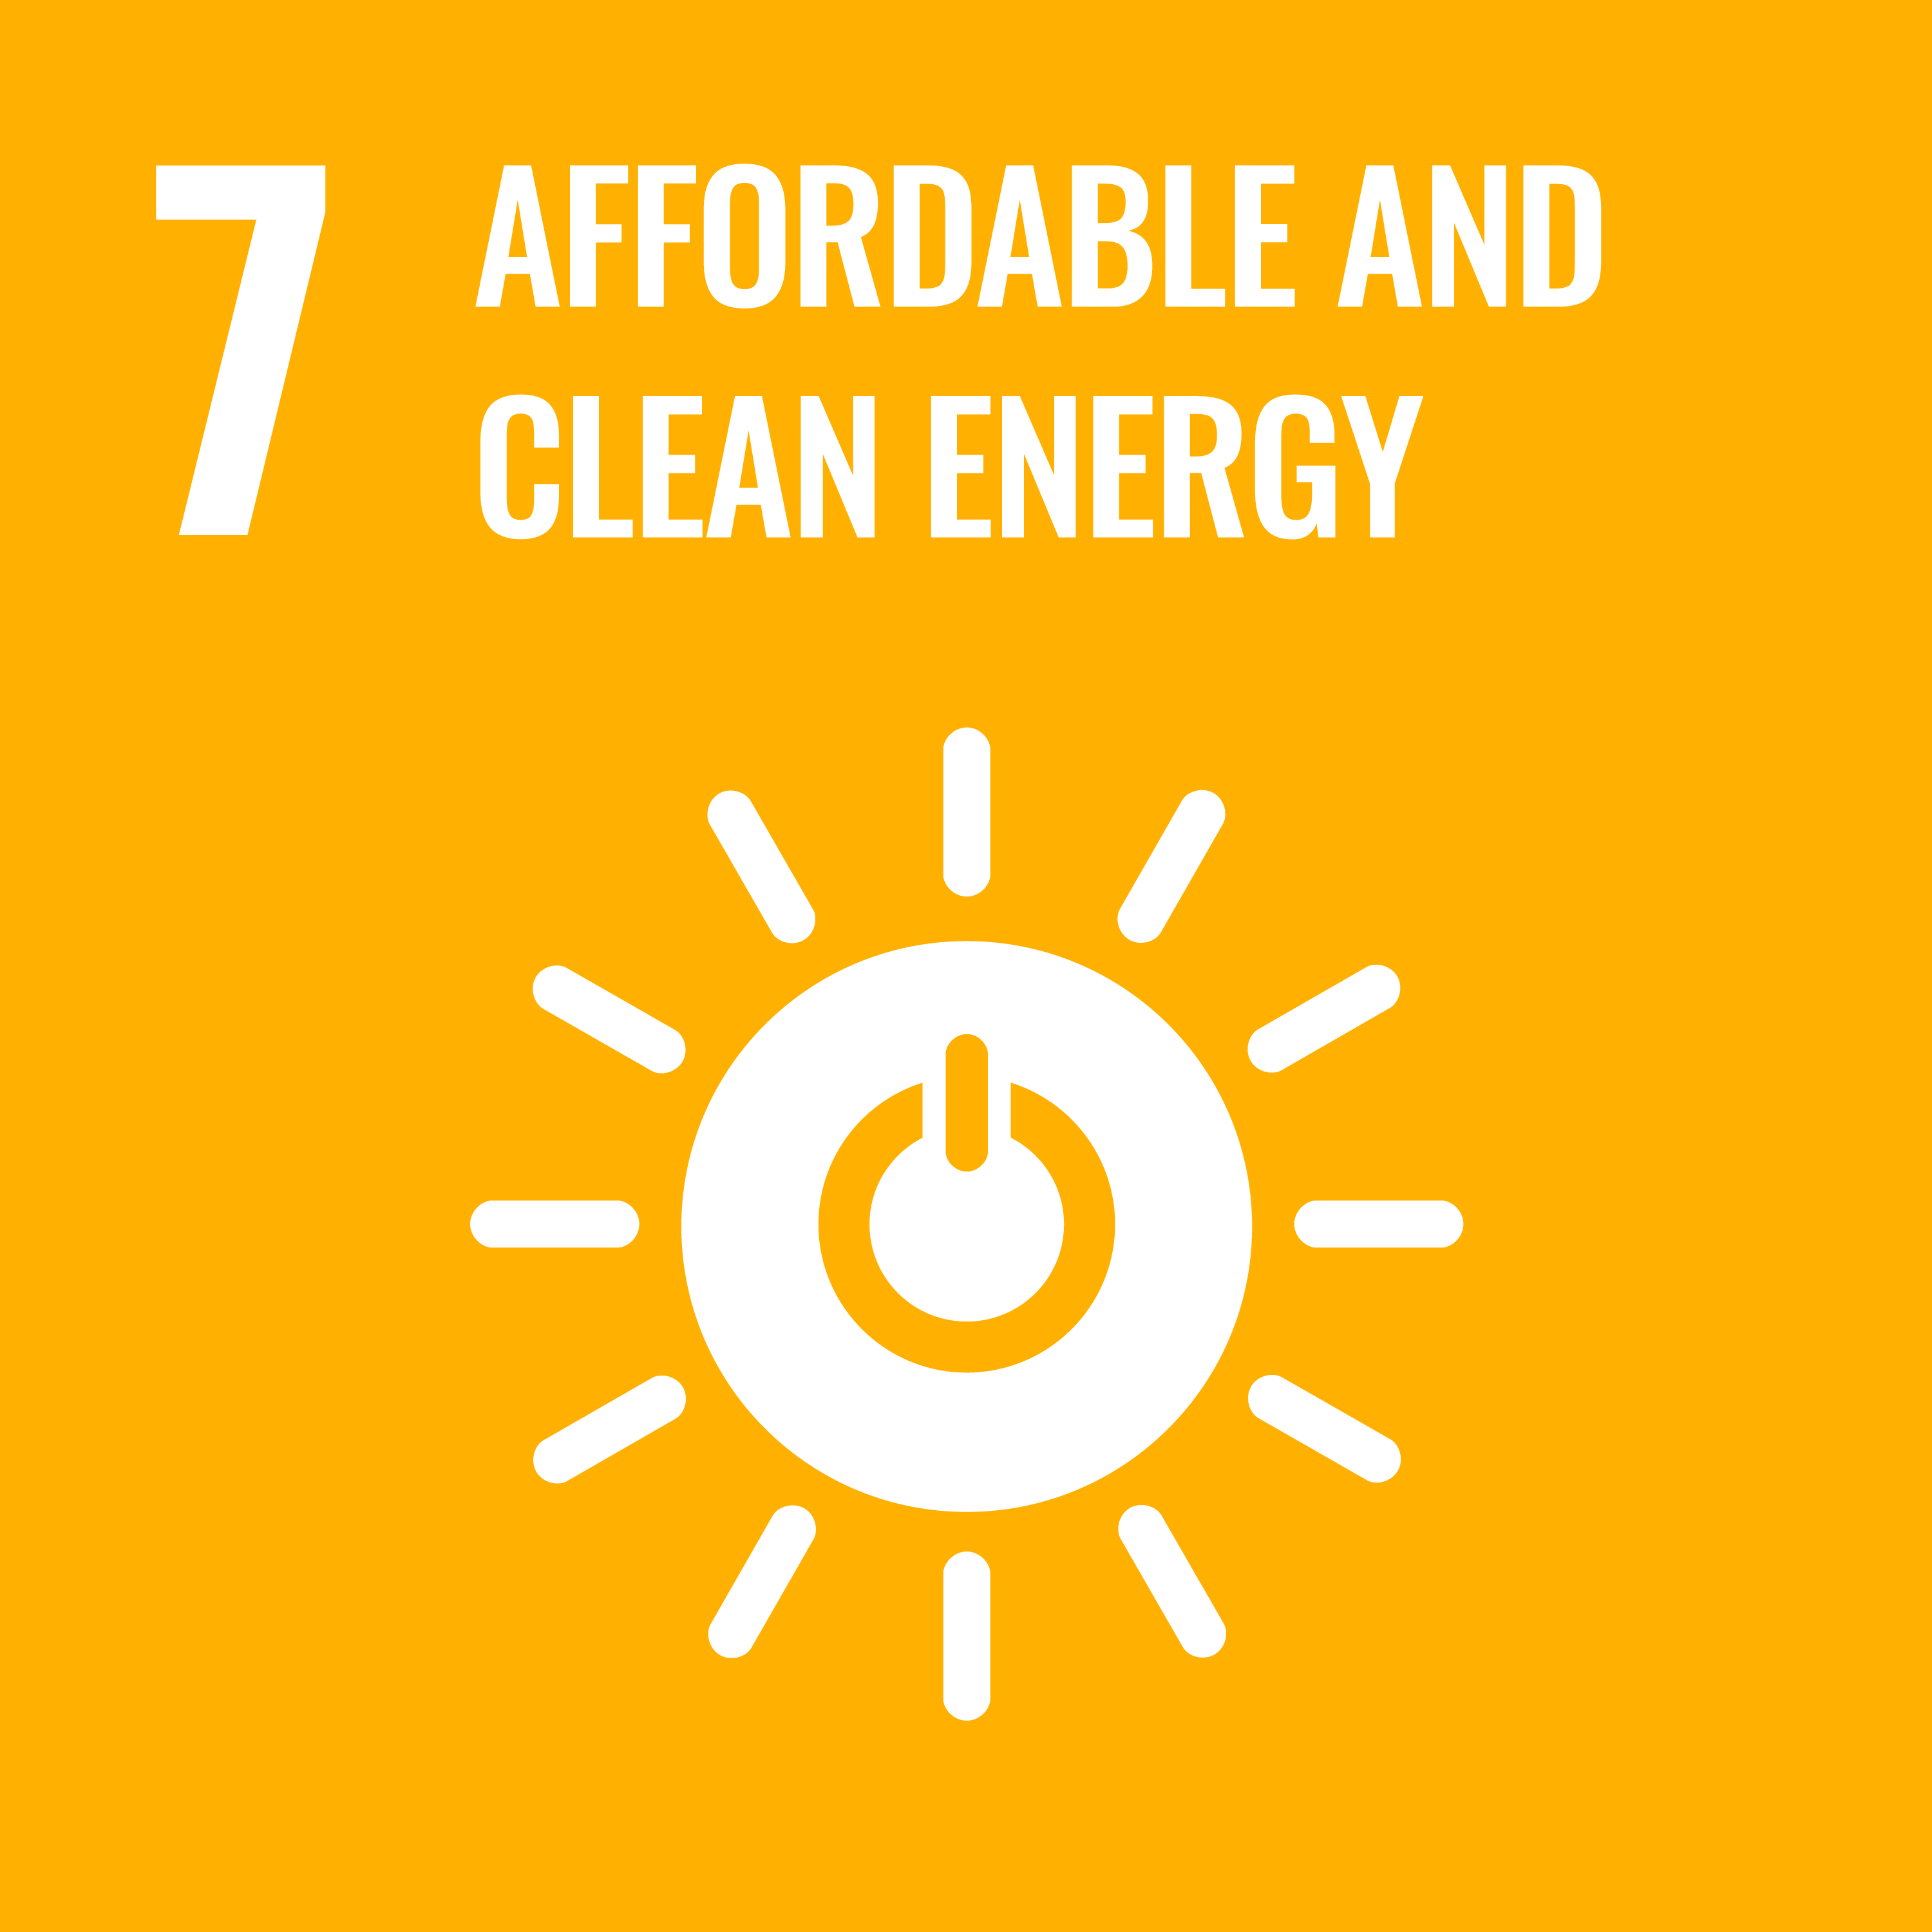 Our contribution to SDG 7